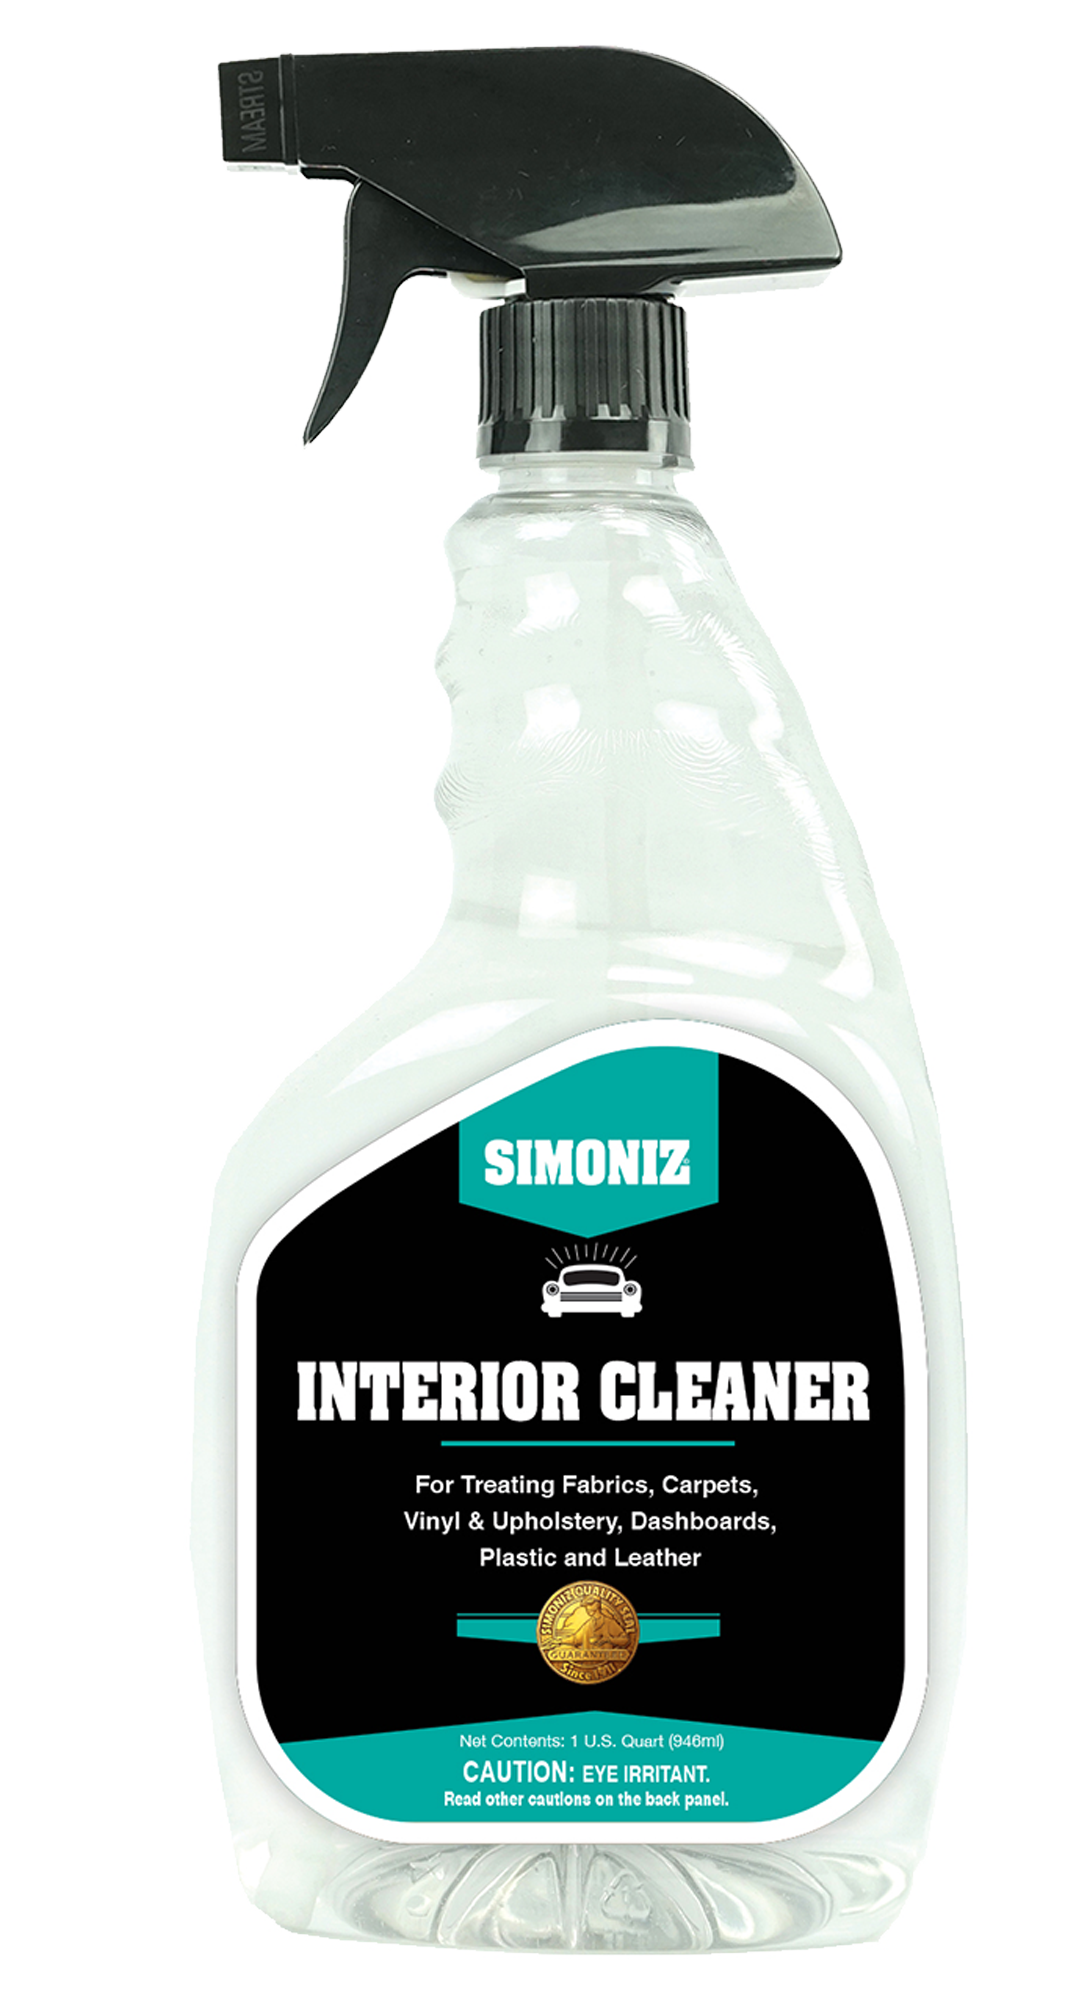  Simoniz Leather Cleaning Wipes – Interior Detailer for  Convenient Protection & Cleanup – Includes 50 Wipes for All Leather  Surfaces - UV Protection - Great for Cars, Trucks, SUVs, Boats : Automotive